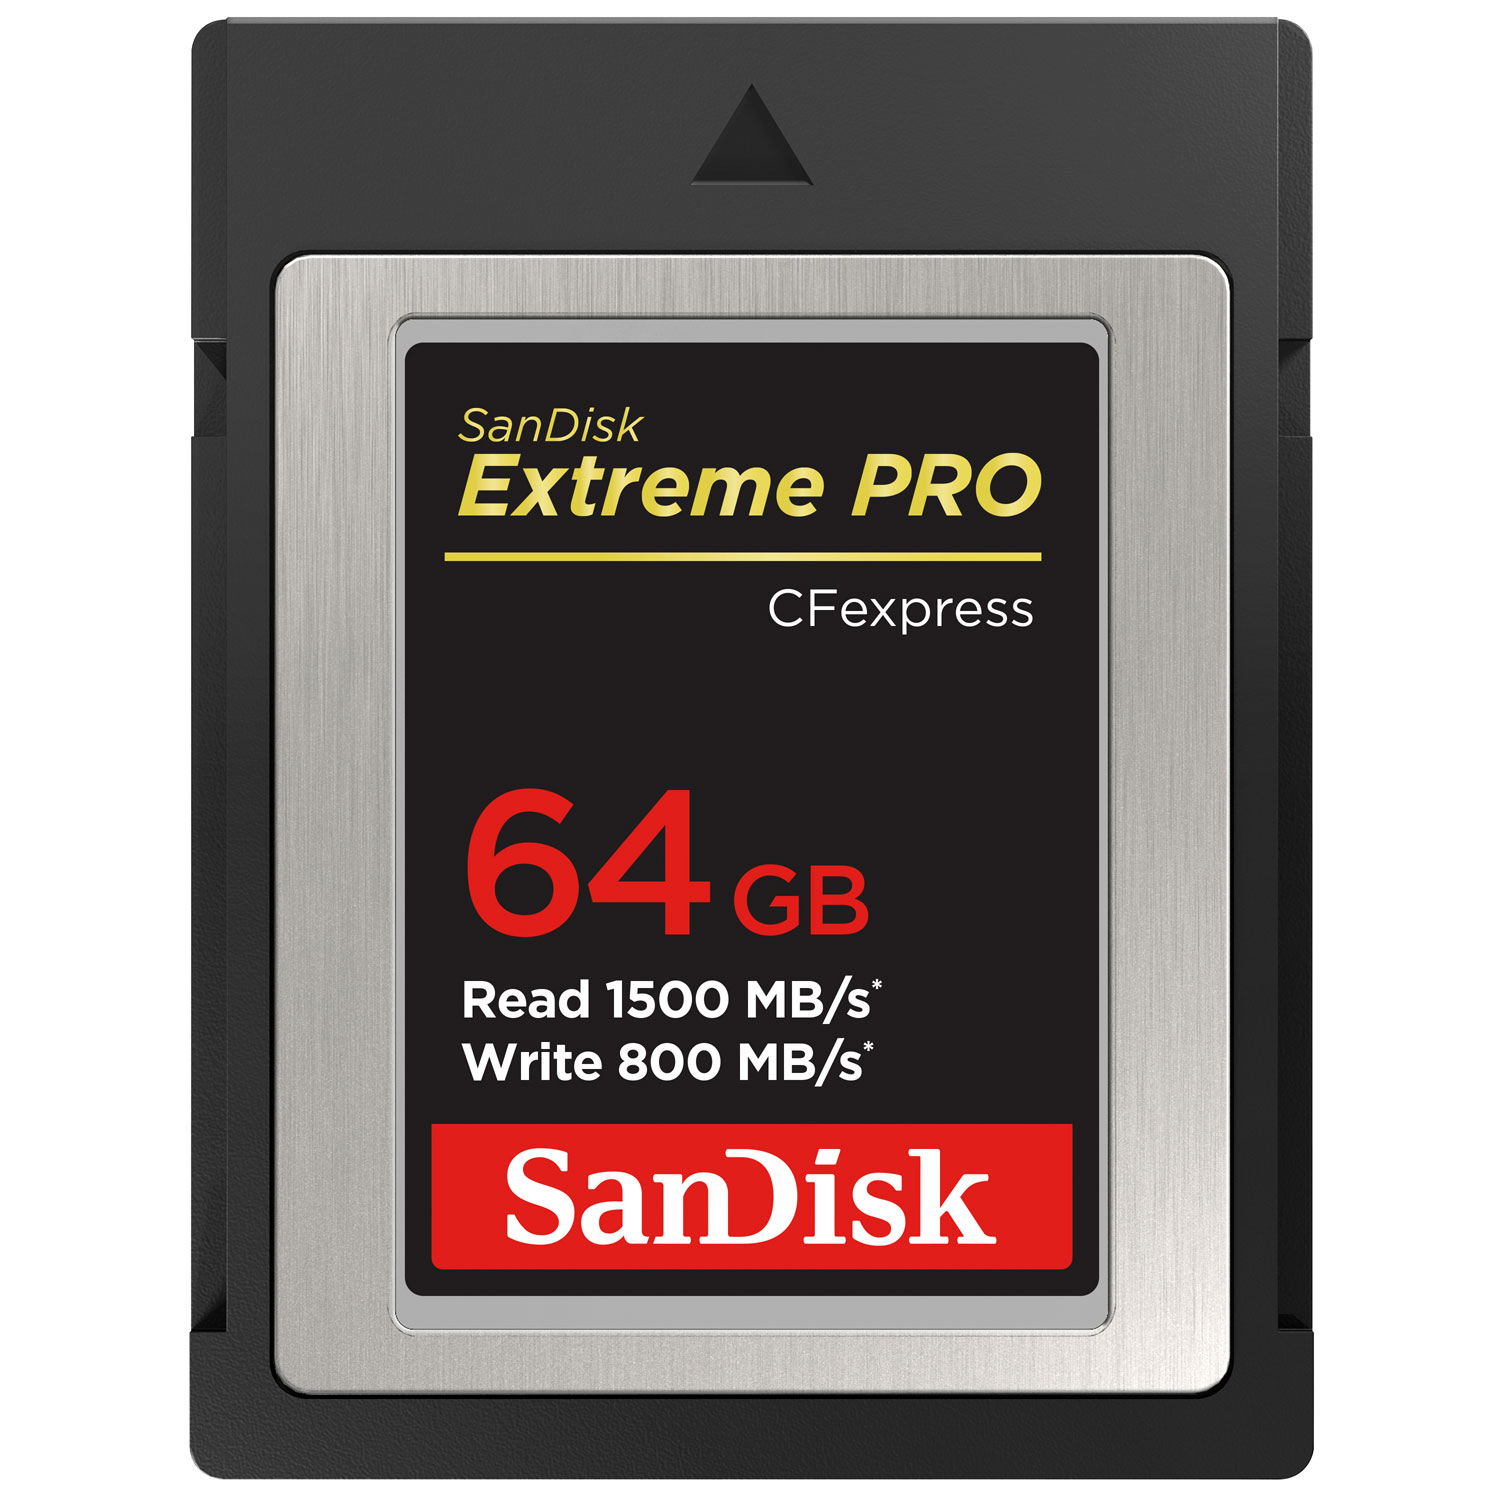 SanDisk Extreme Pro 64GB 1500MB/s CFexpress Memory Card